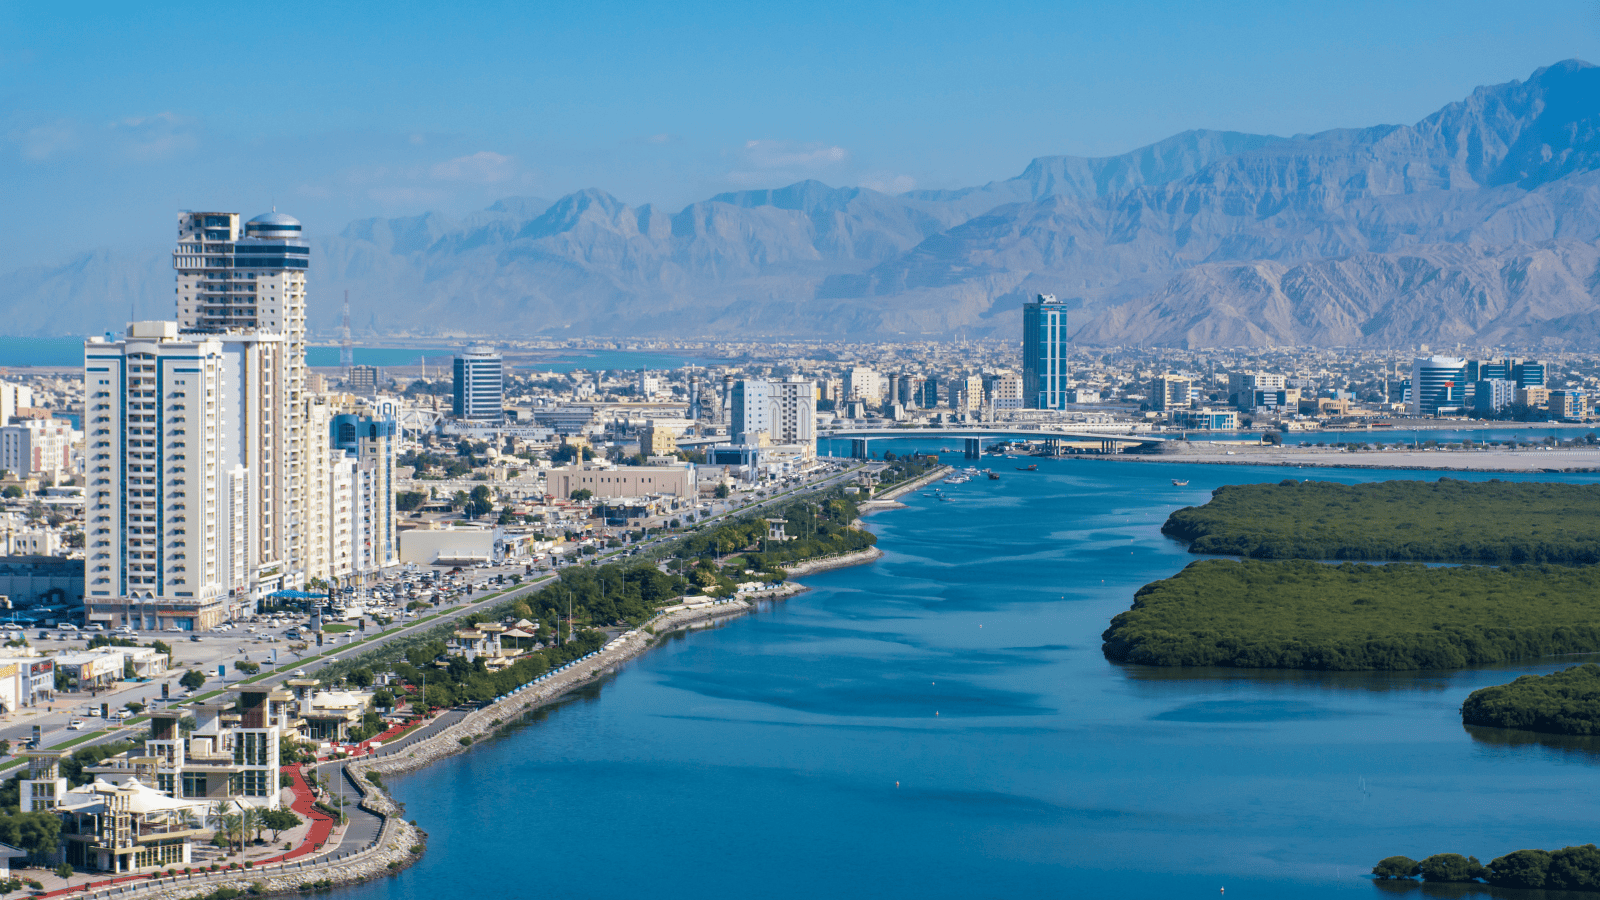 <p>As one of the largest UAE cities, Ras Al-Khaimah has no shortage of incredible things to see and do. It’s divided into the western old town and eastern Al Nakheel.</p><p>Ras Al-Khaimah is ideal for those who want to taste UAE life on a budget. Though only an hour from Dubai, it’s much cheaper without skimping on a high-end atmosphere.</p>